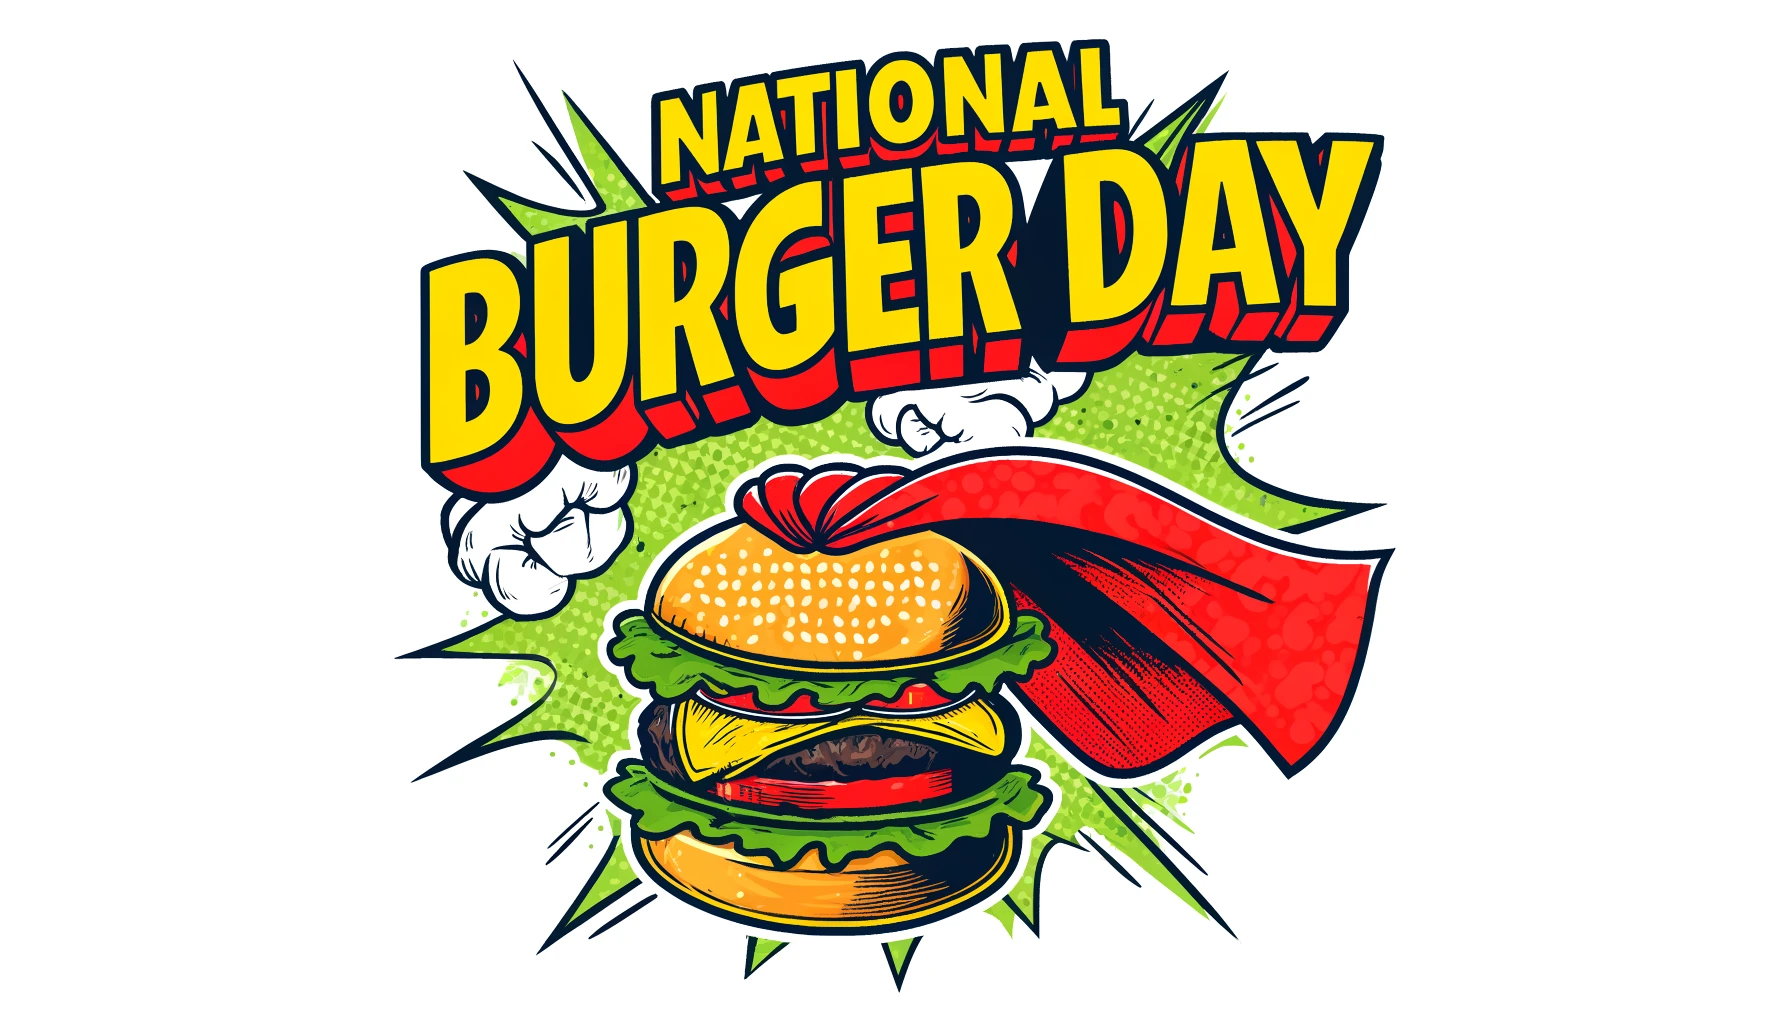 Tasty National Burger Day Wishes for Foodies